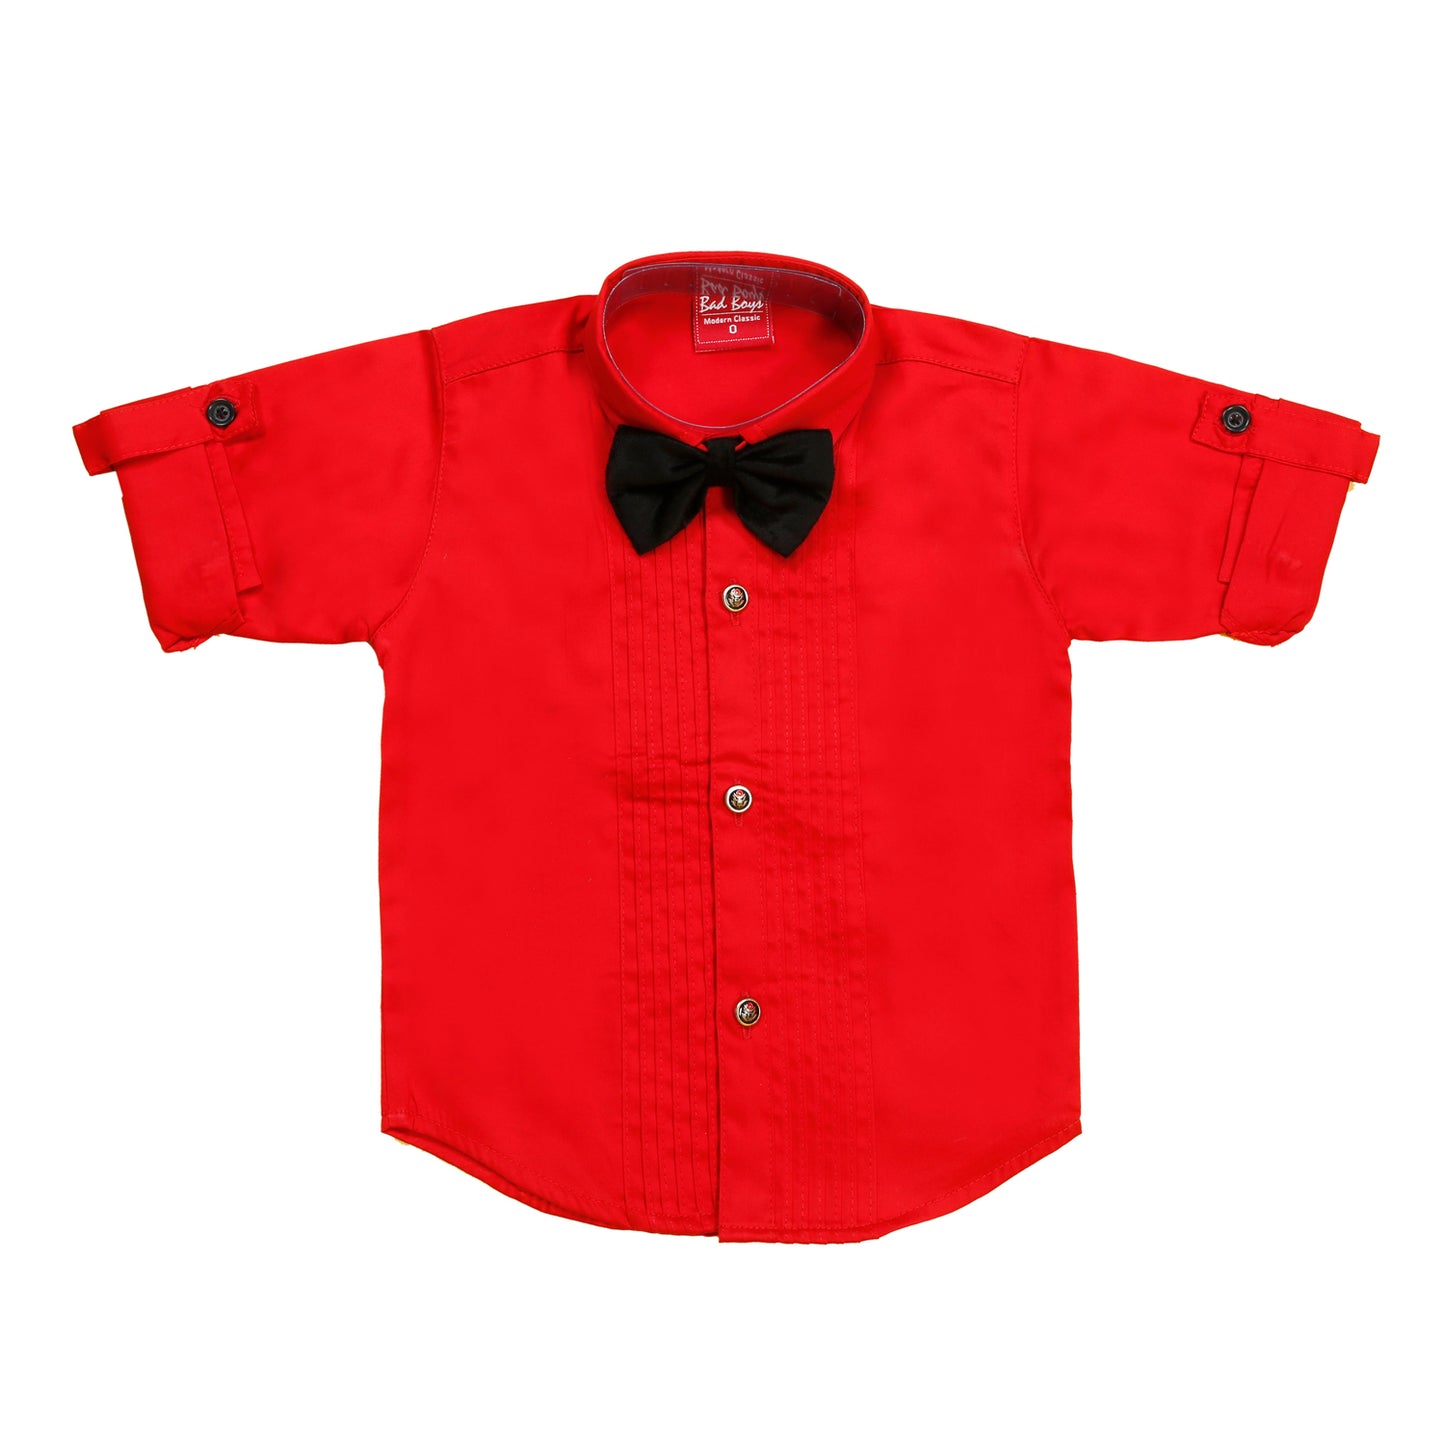 Bad Boys Plaid Party Wear Outfit with Suspenders and a Bow tie. - mashup boys